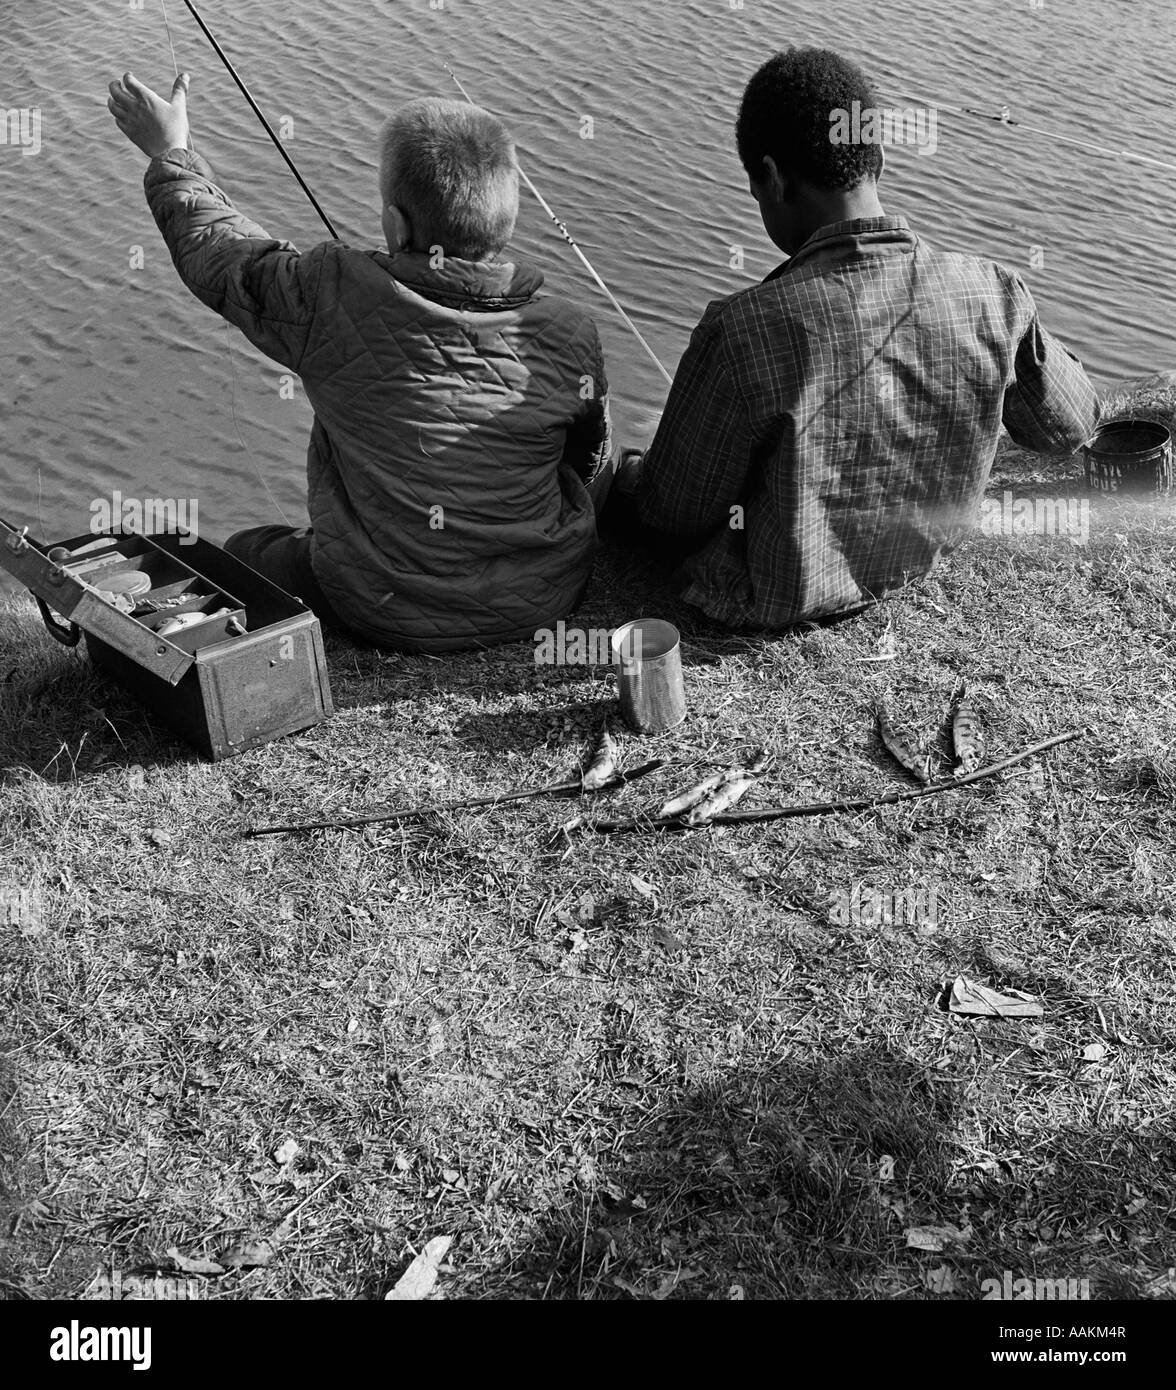 https://c8.alamy.com/comp/AAKM4R/1960s-back-view-of-black-boy-and-white-boy-fishing-in-water-with-can-AAKM4R.jpg